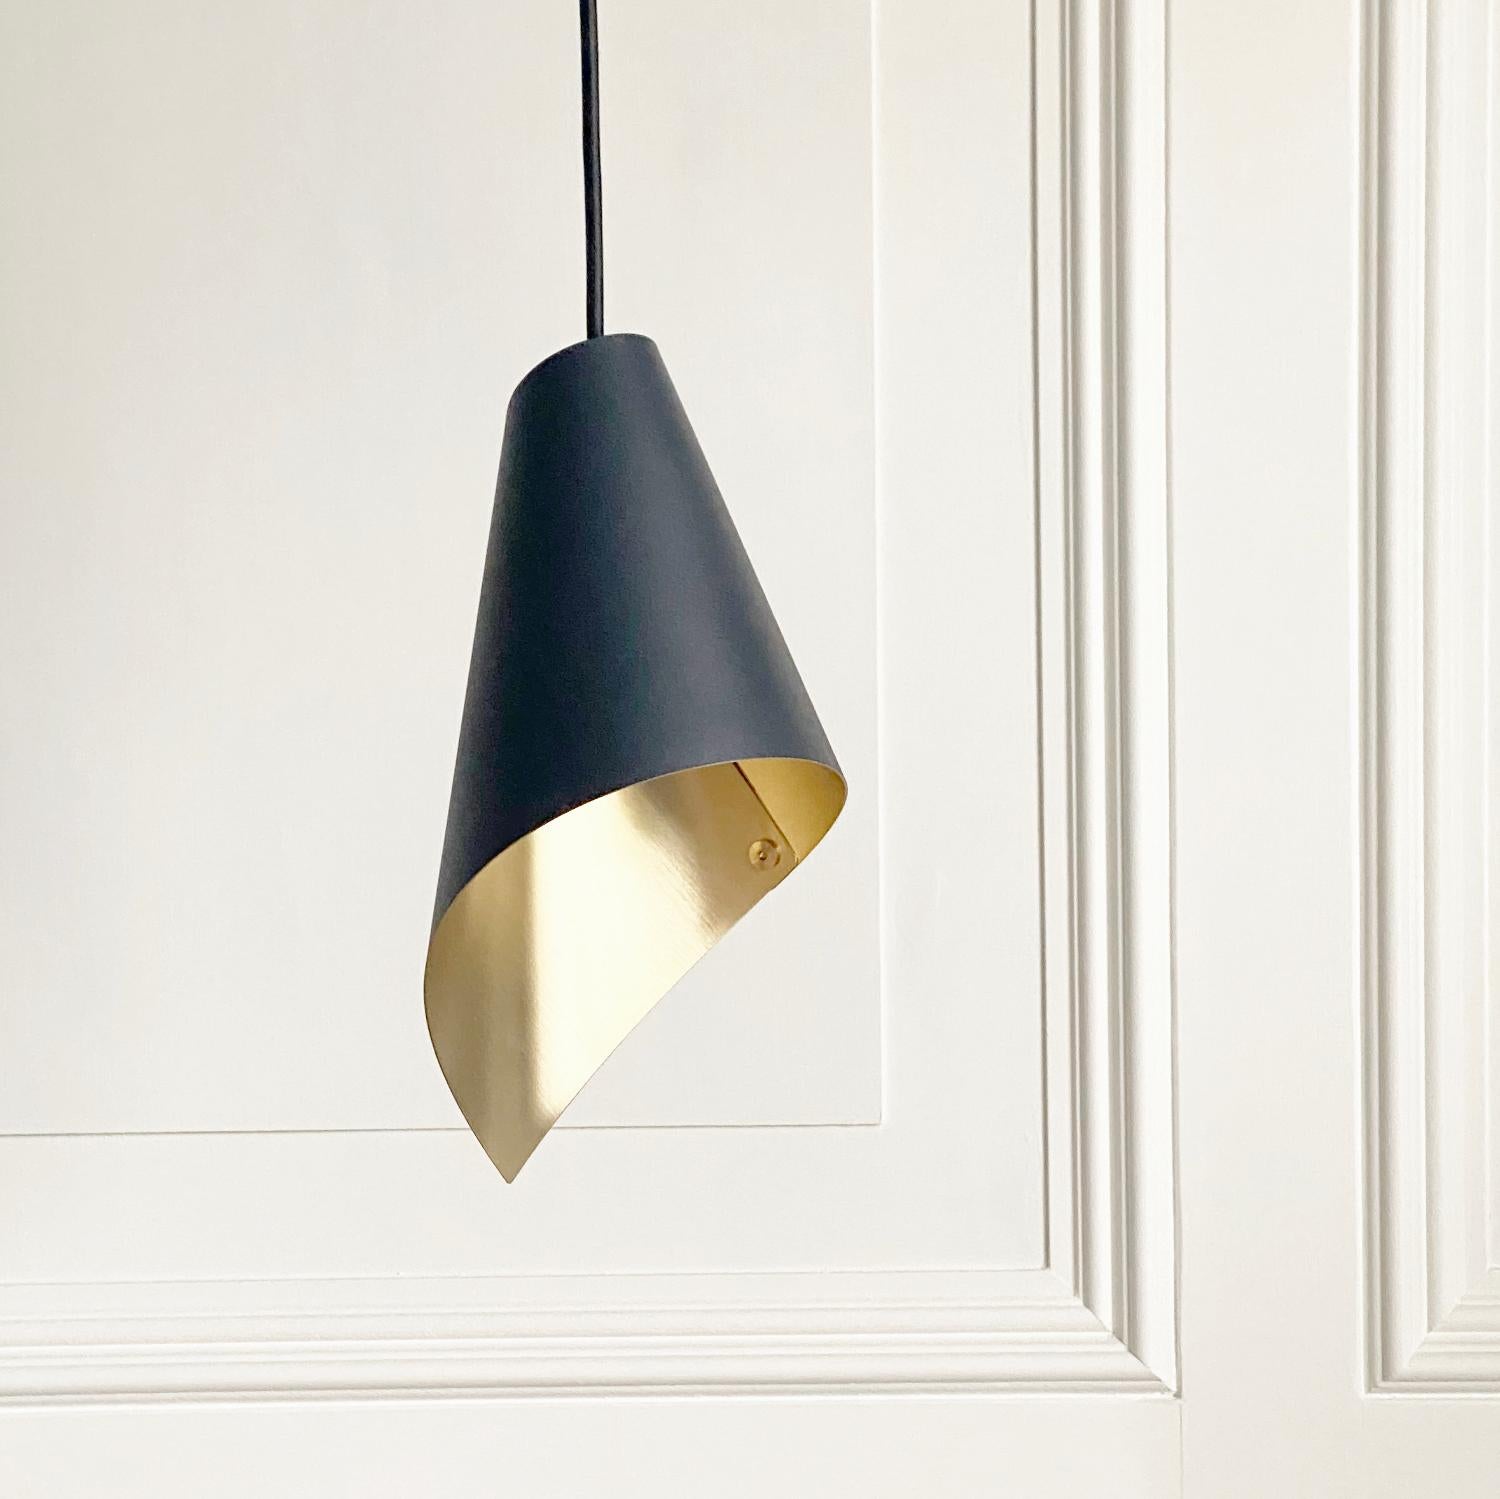 The black & brushed brass ARC pendant light can be used in many different configurations to stunning effect. Hang singles or in rows to create individual pools of light or in clusters of 3 or 5 to give wider illumination.

Hand wrapped from a single